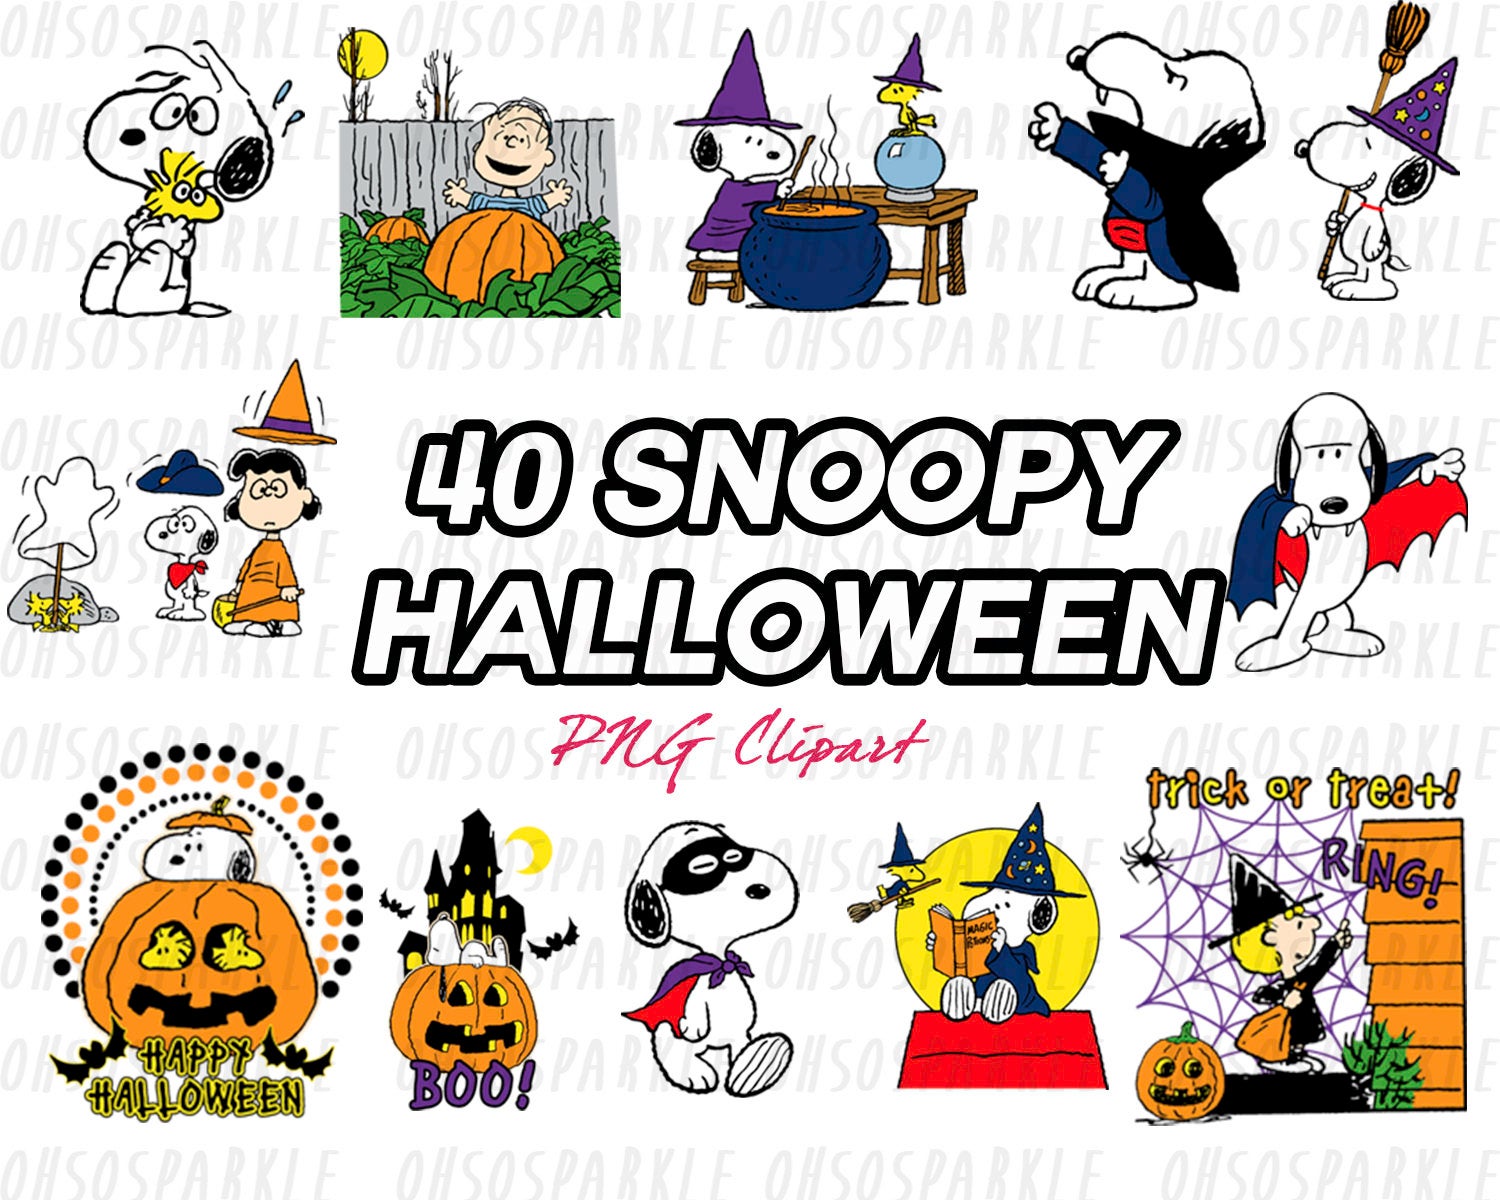 Snoopy halloween clip art png charlie brown.